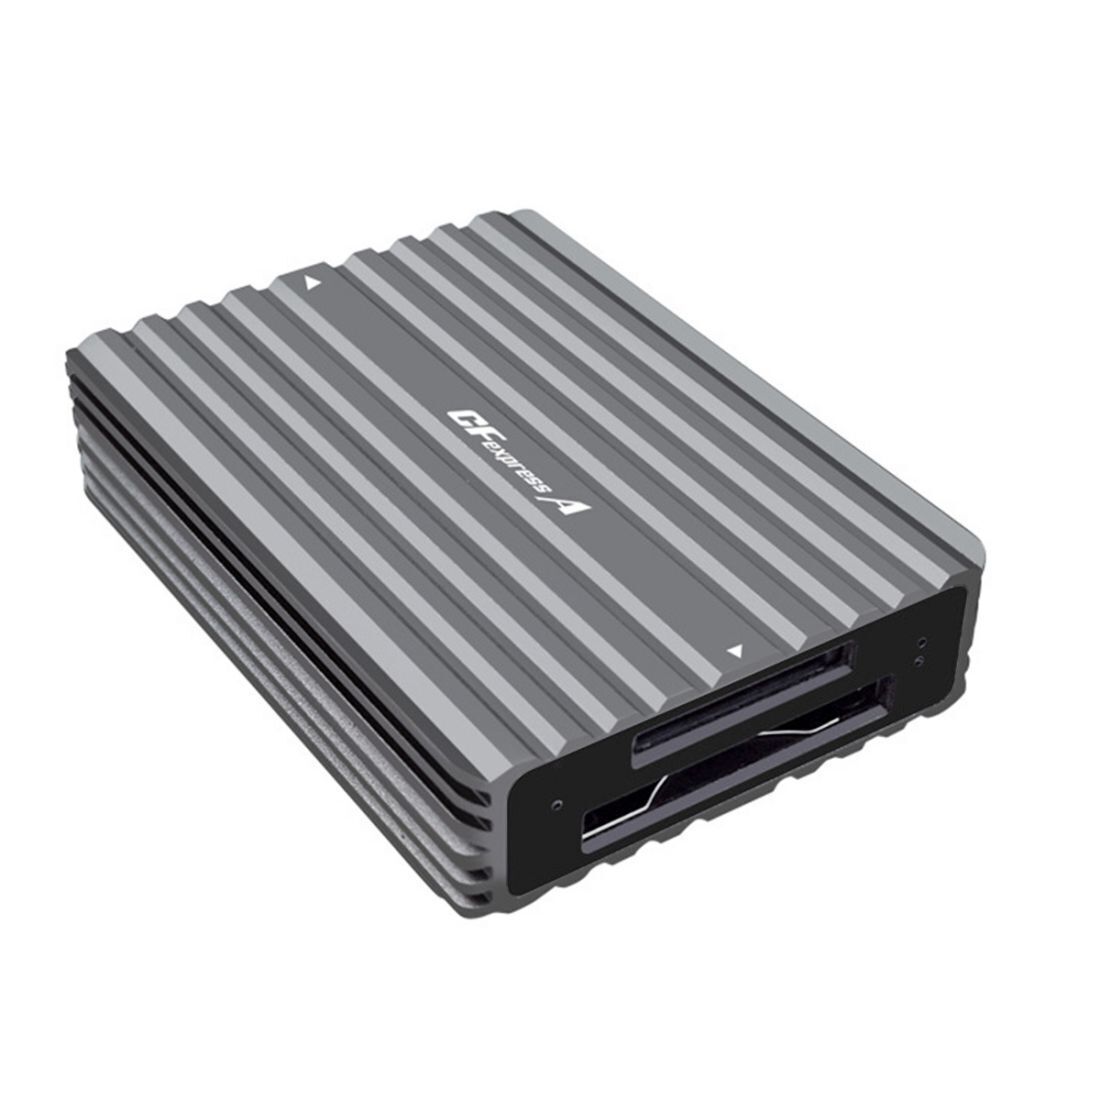 Jimier 2 in 1 USB 3.1 Gen2 10Gbps CF Express Type A/B Memory Card Reader Adapter